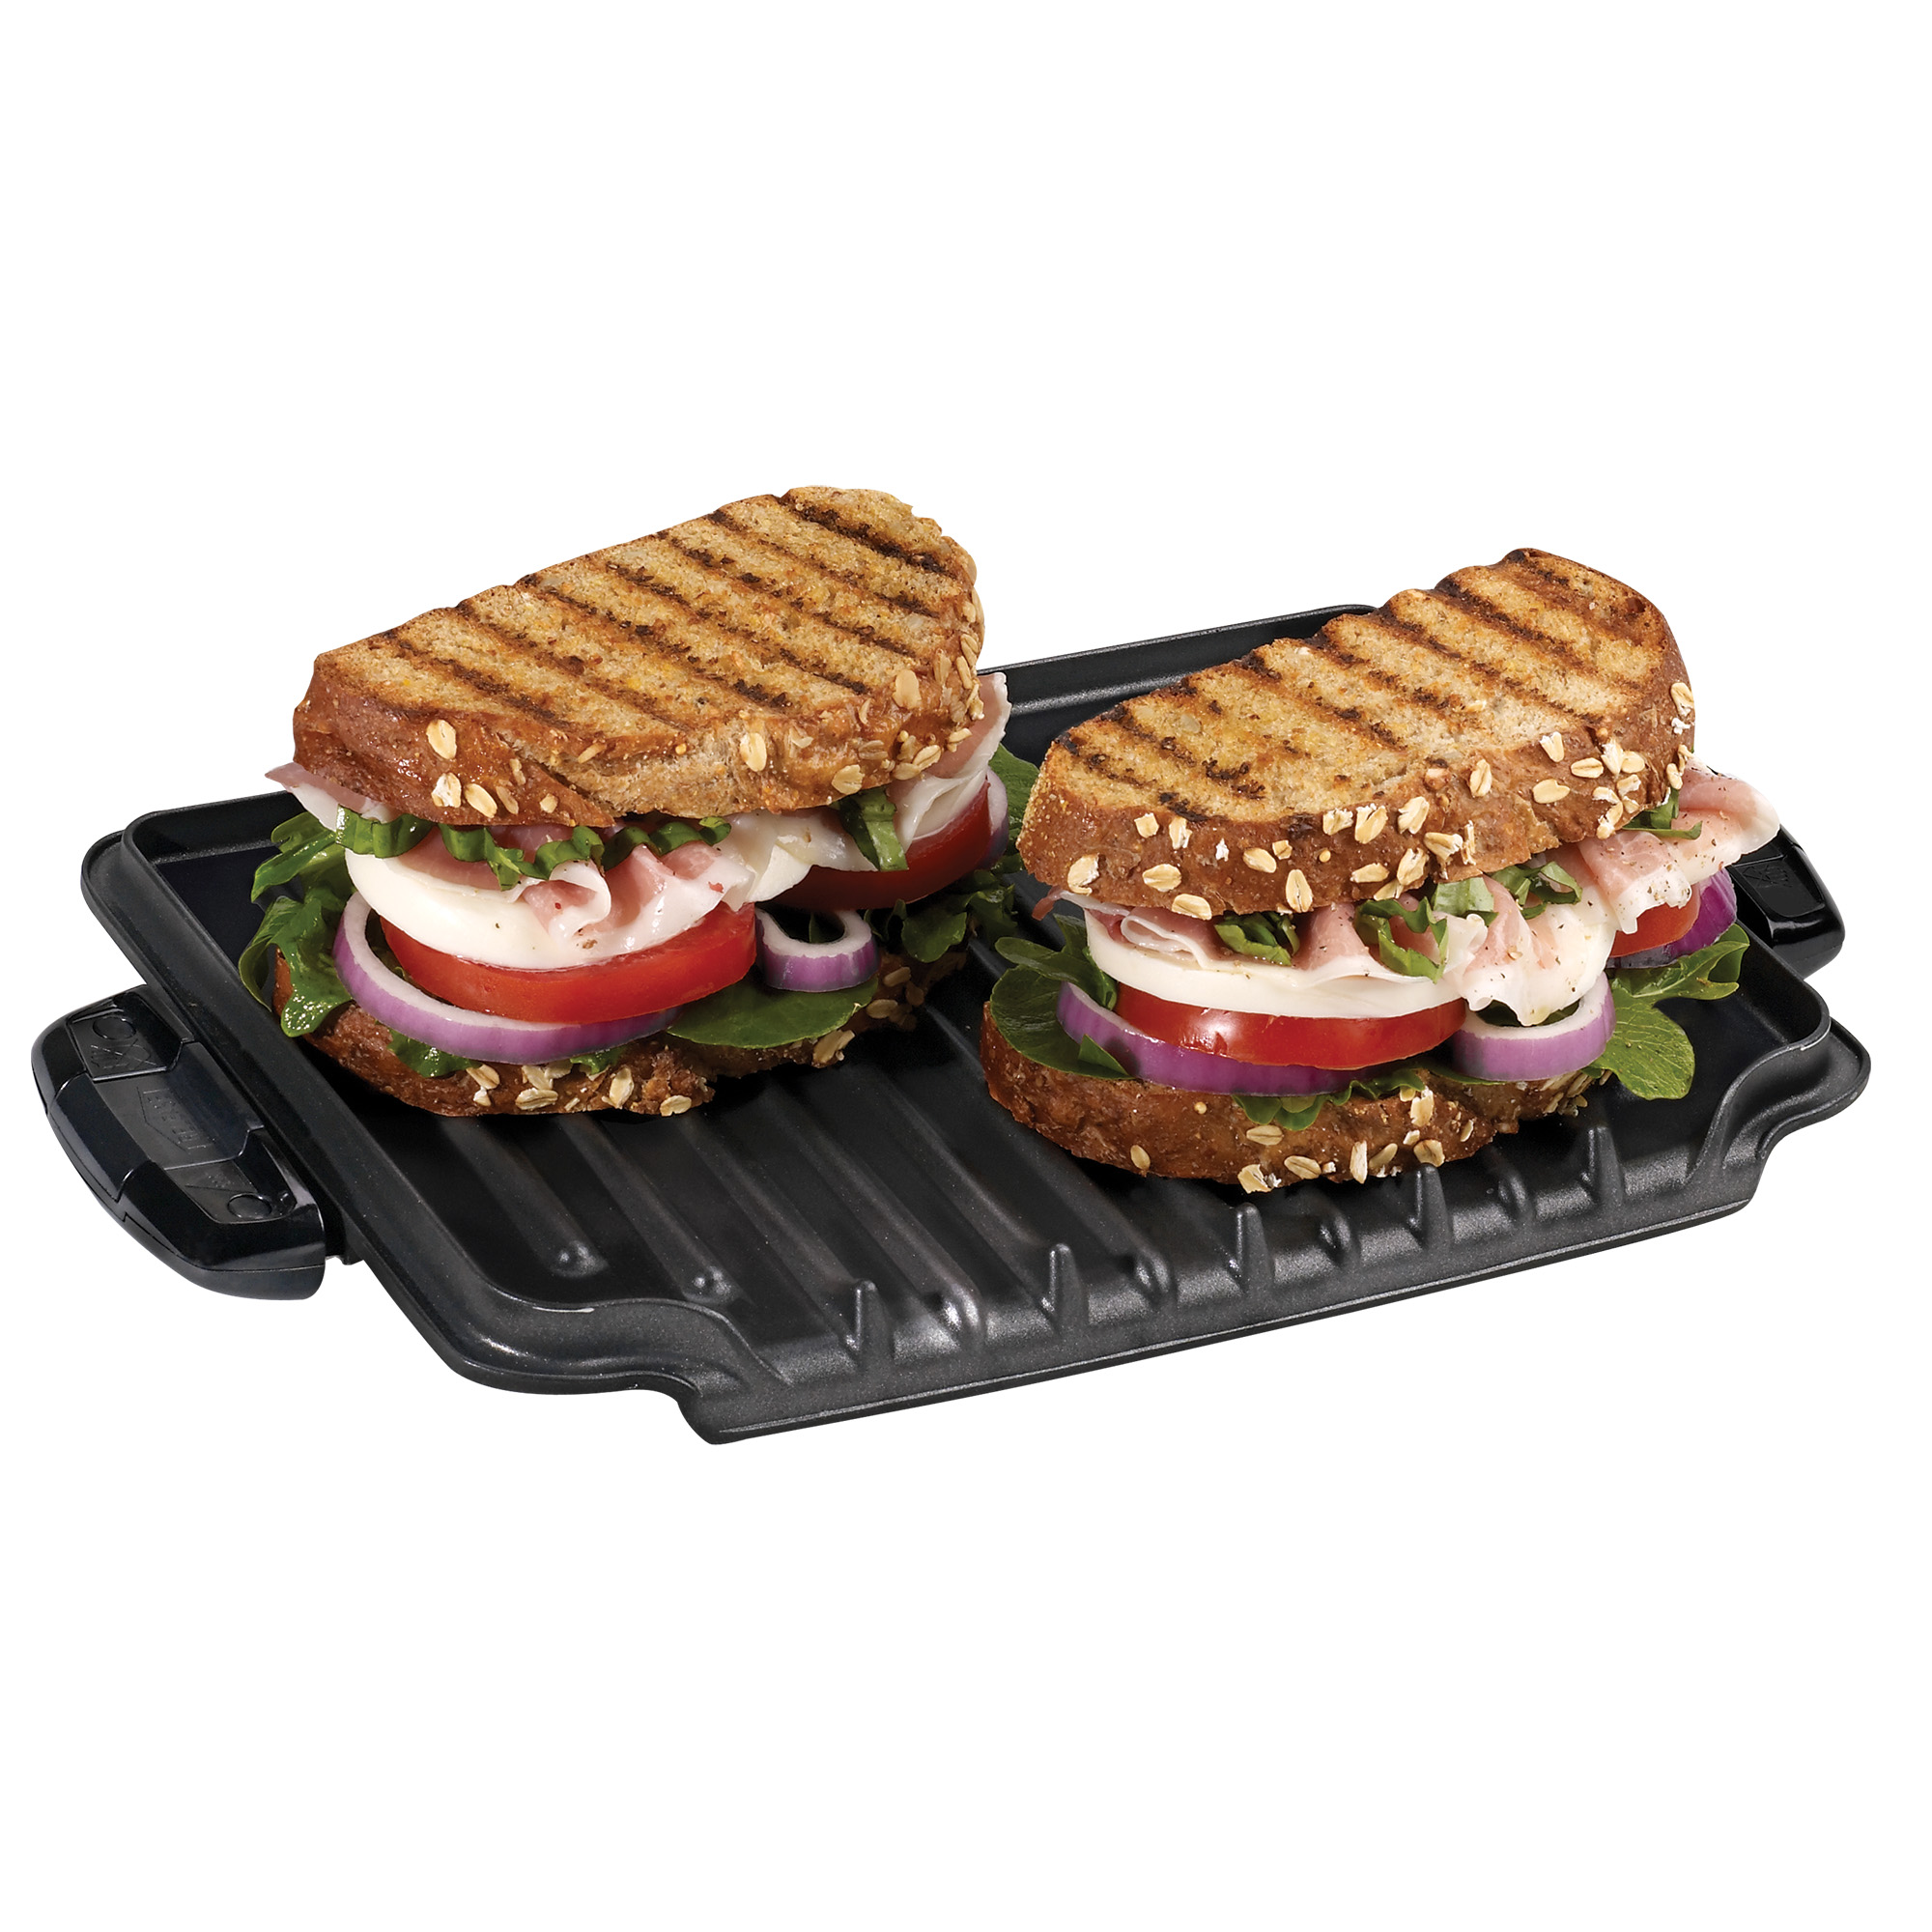 George Foreman 6-Serving Digital Timer & Temp Removable Plate Grill, Red, GRP95R - image 3 of 3